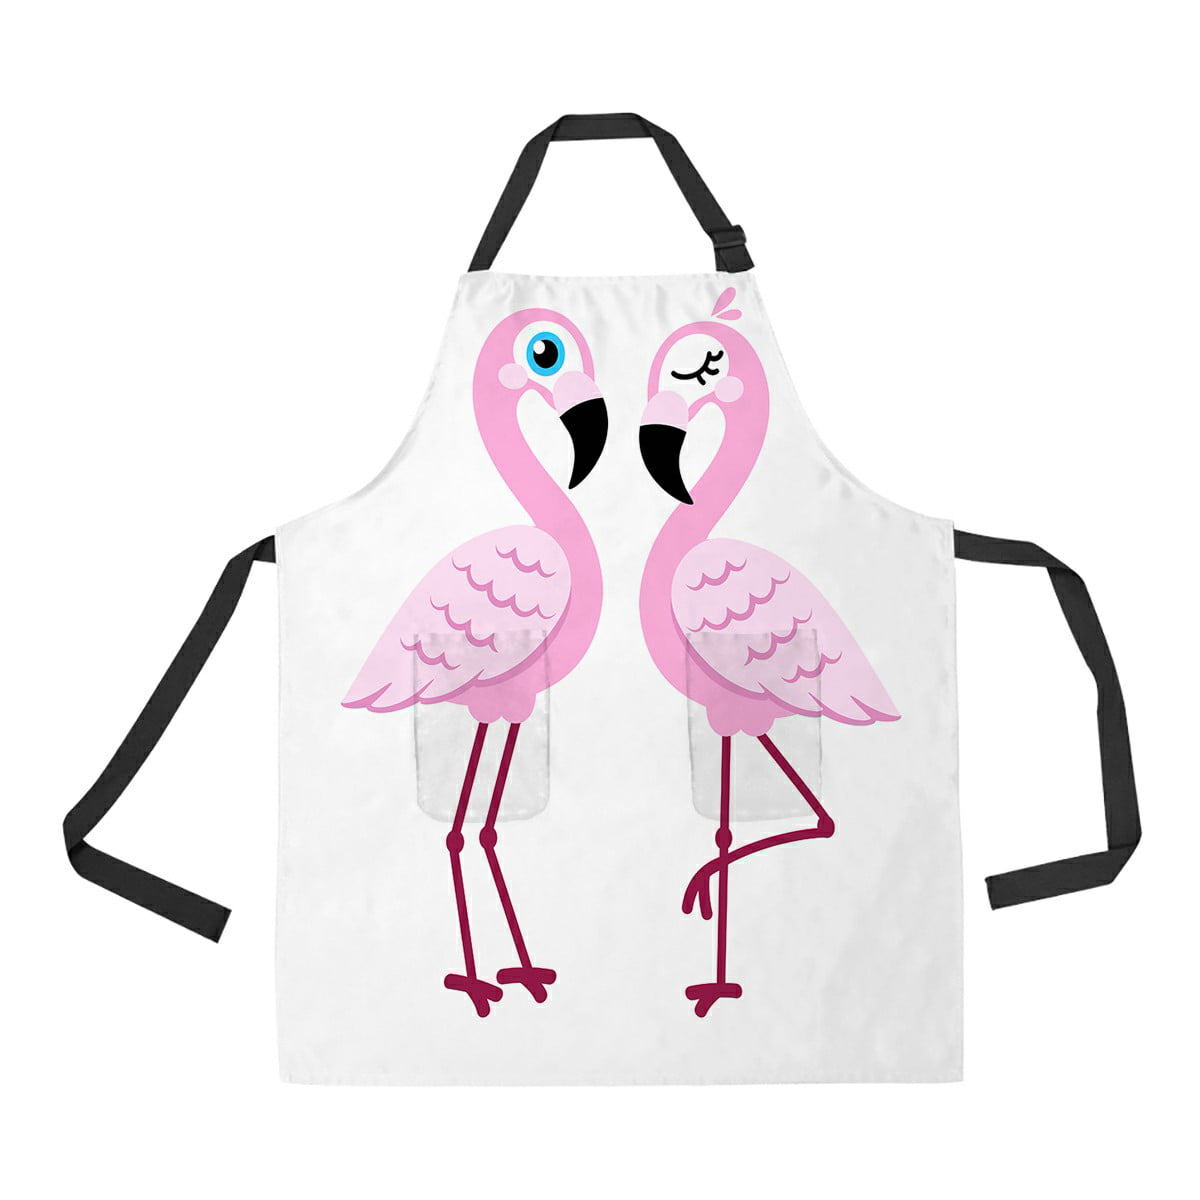 Artsy Funny Pink Flamingo Bird Drinking Wine Adjustable Bib Apron Adult Home Kitchen Apron Chef Apron for Men and Women 